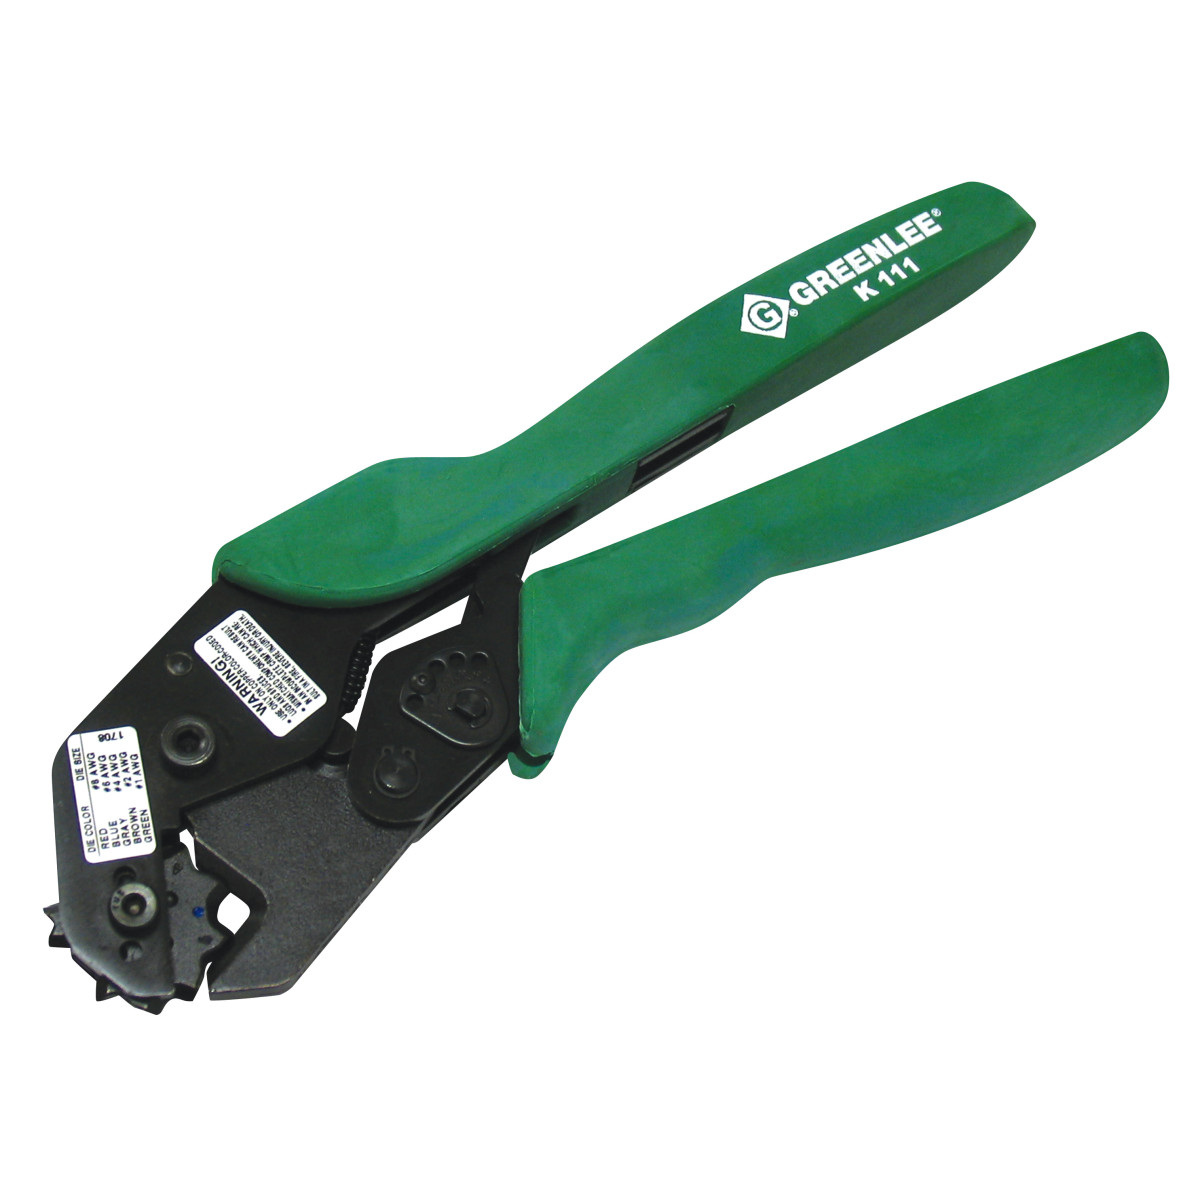 Greenlee® K05-SYNCRO Manual Mechanical Crimp Tool, 8 to 1/0 AWG Cable/Wire